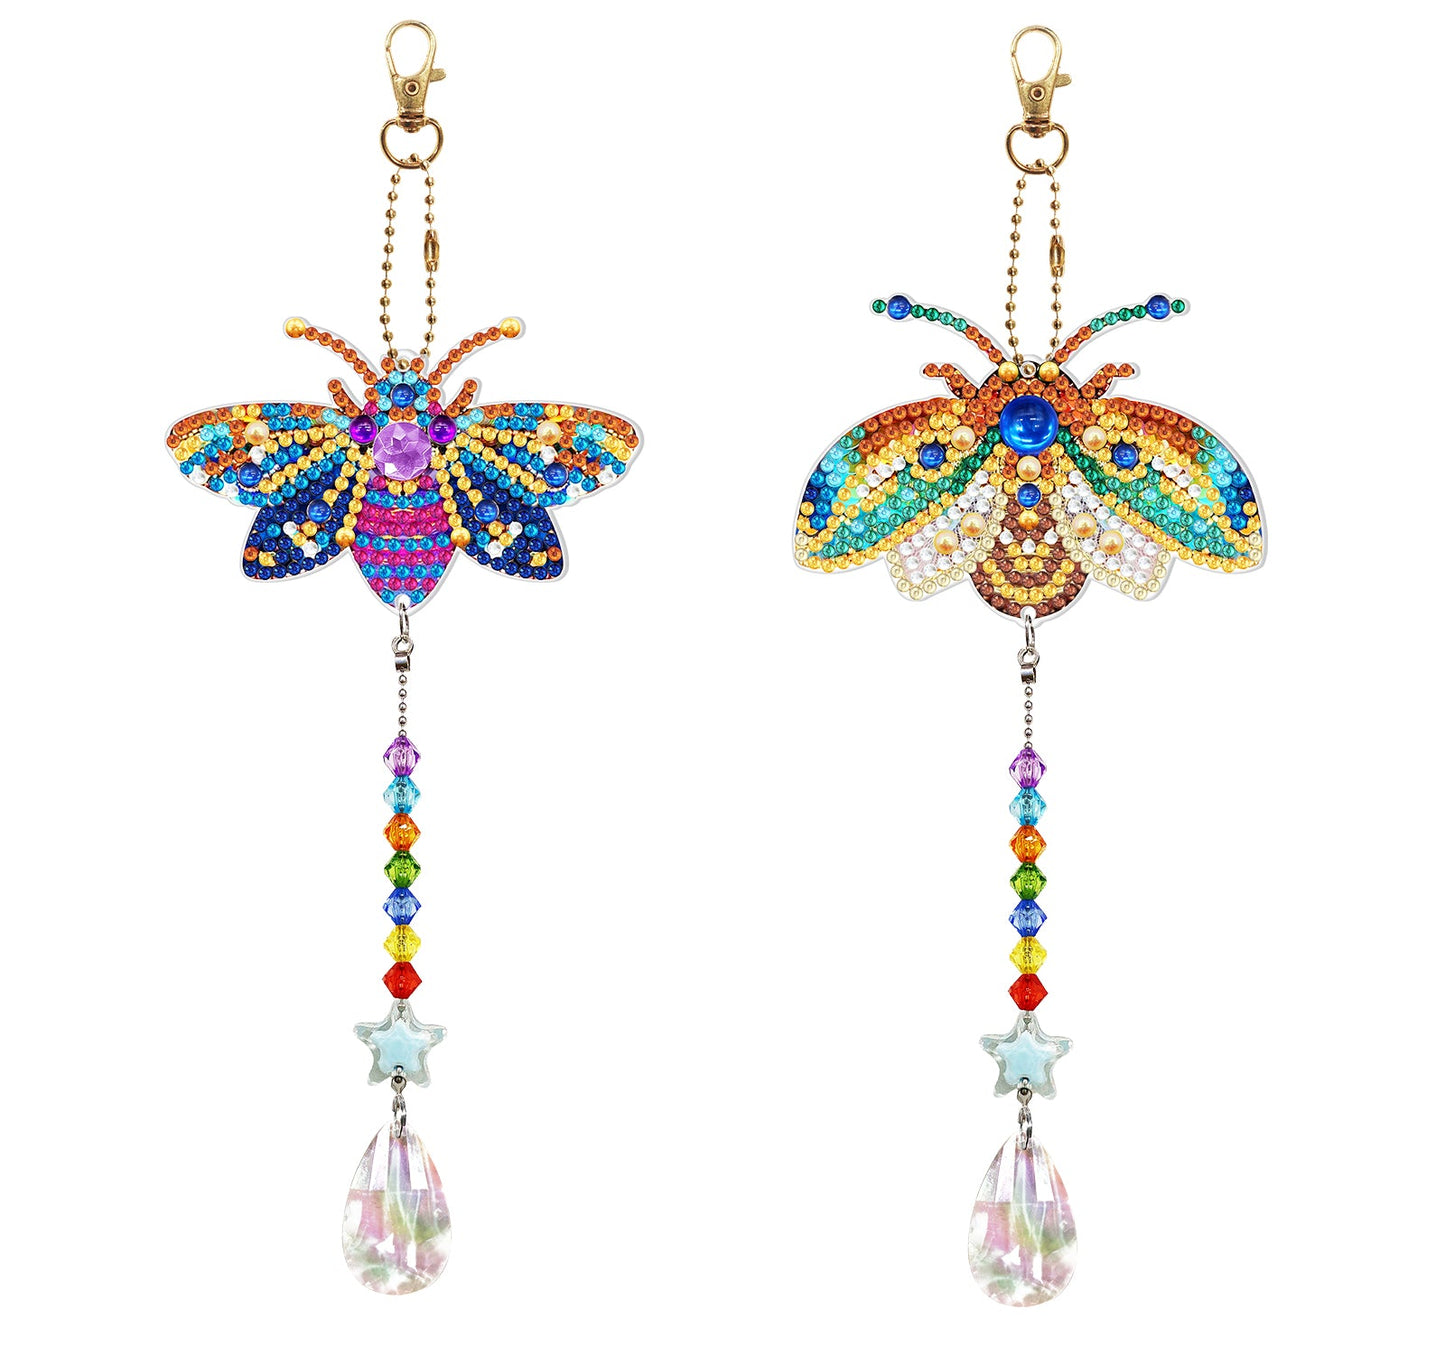 Diamond Art | Wind Chimes | Flying insects